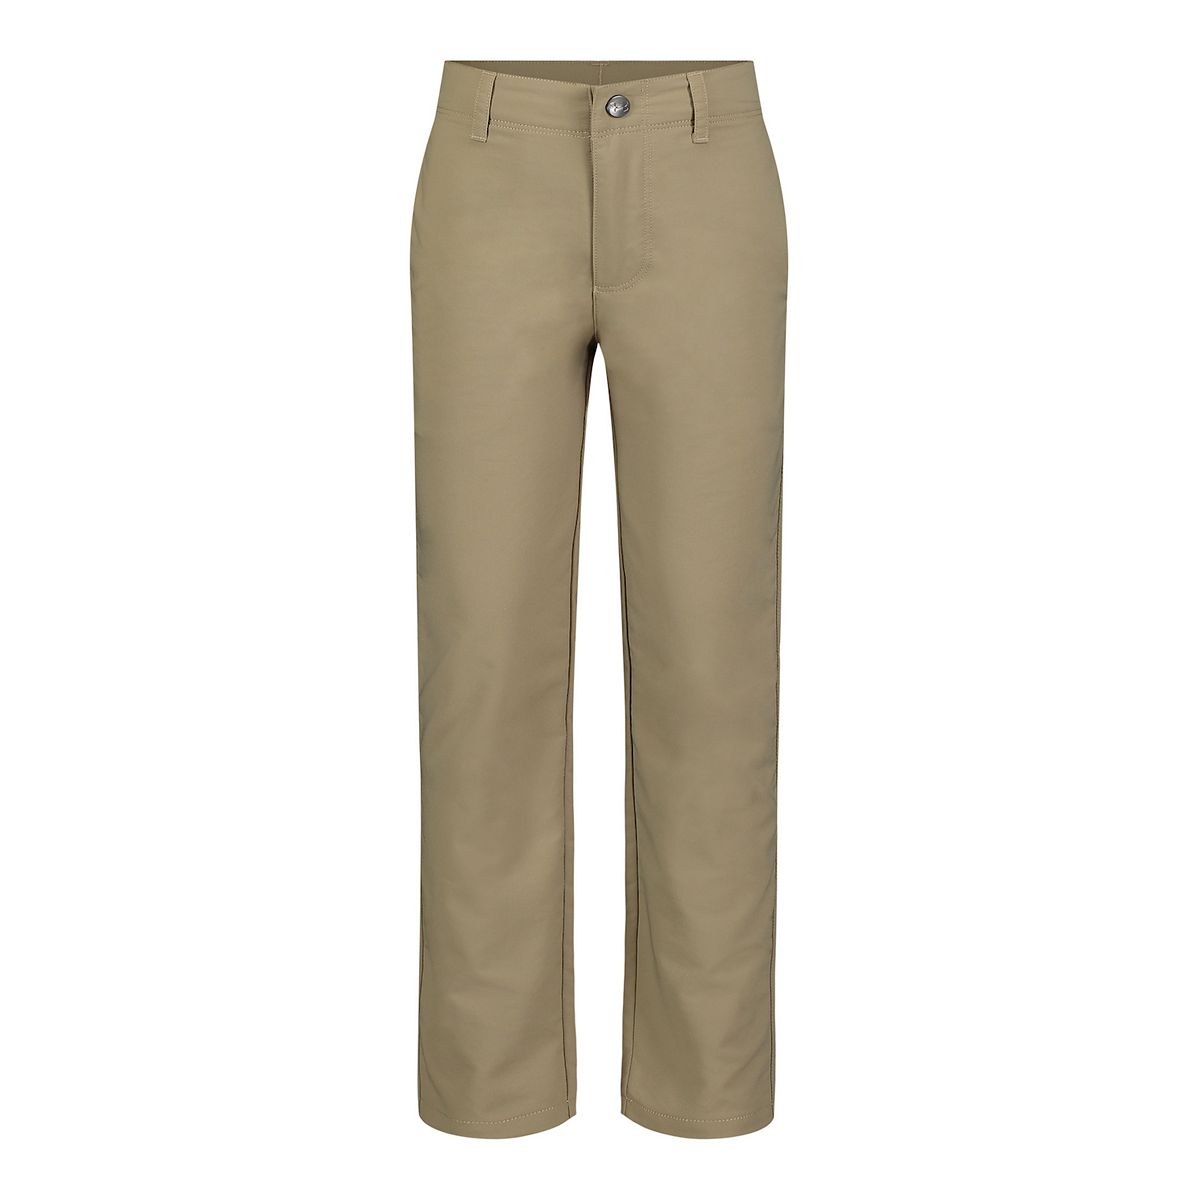 Under Armour Boys' UA Match Play Tapered Pant - Canvas-UNDER ARMOUR-Little Giant Kidz